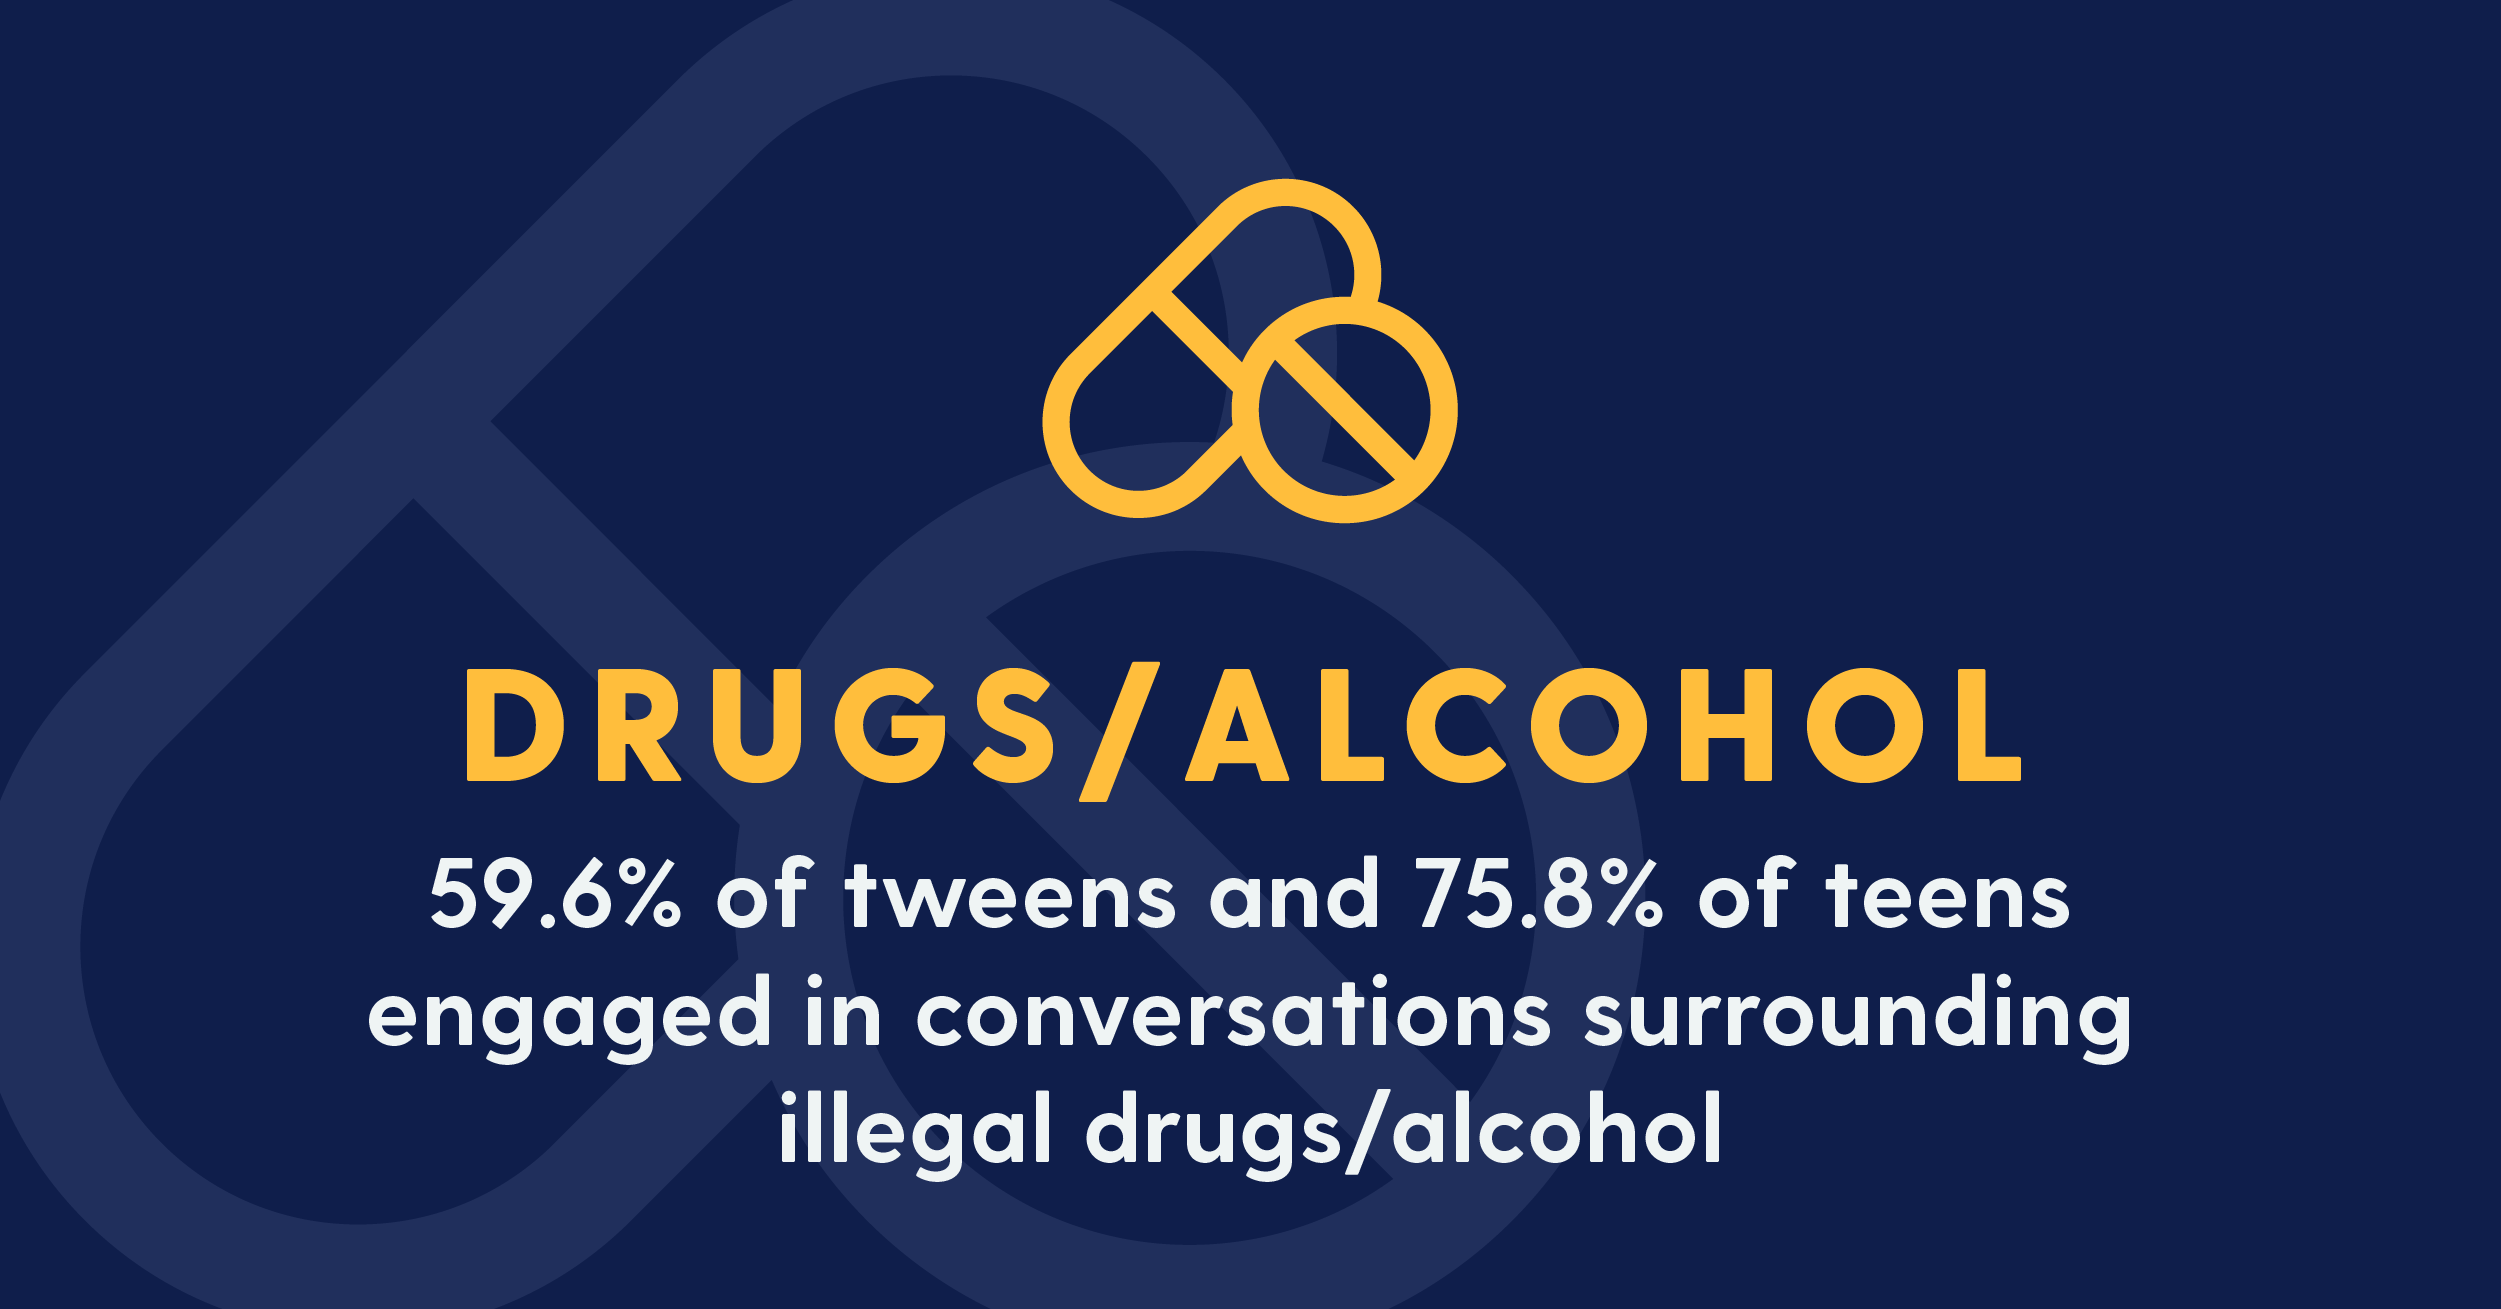 drugs/alcohol facts